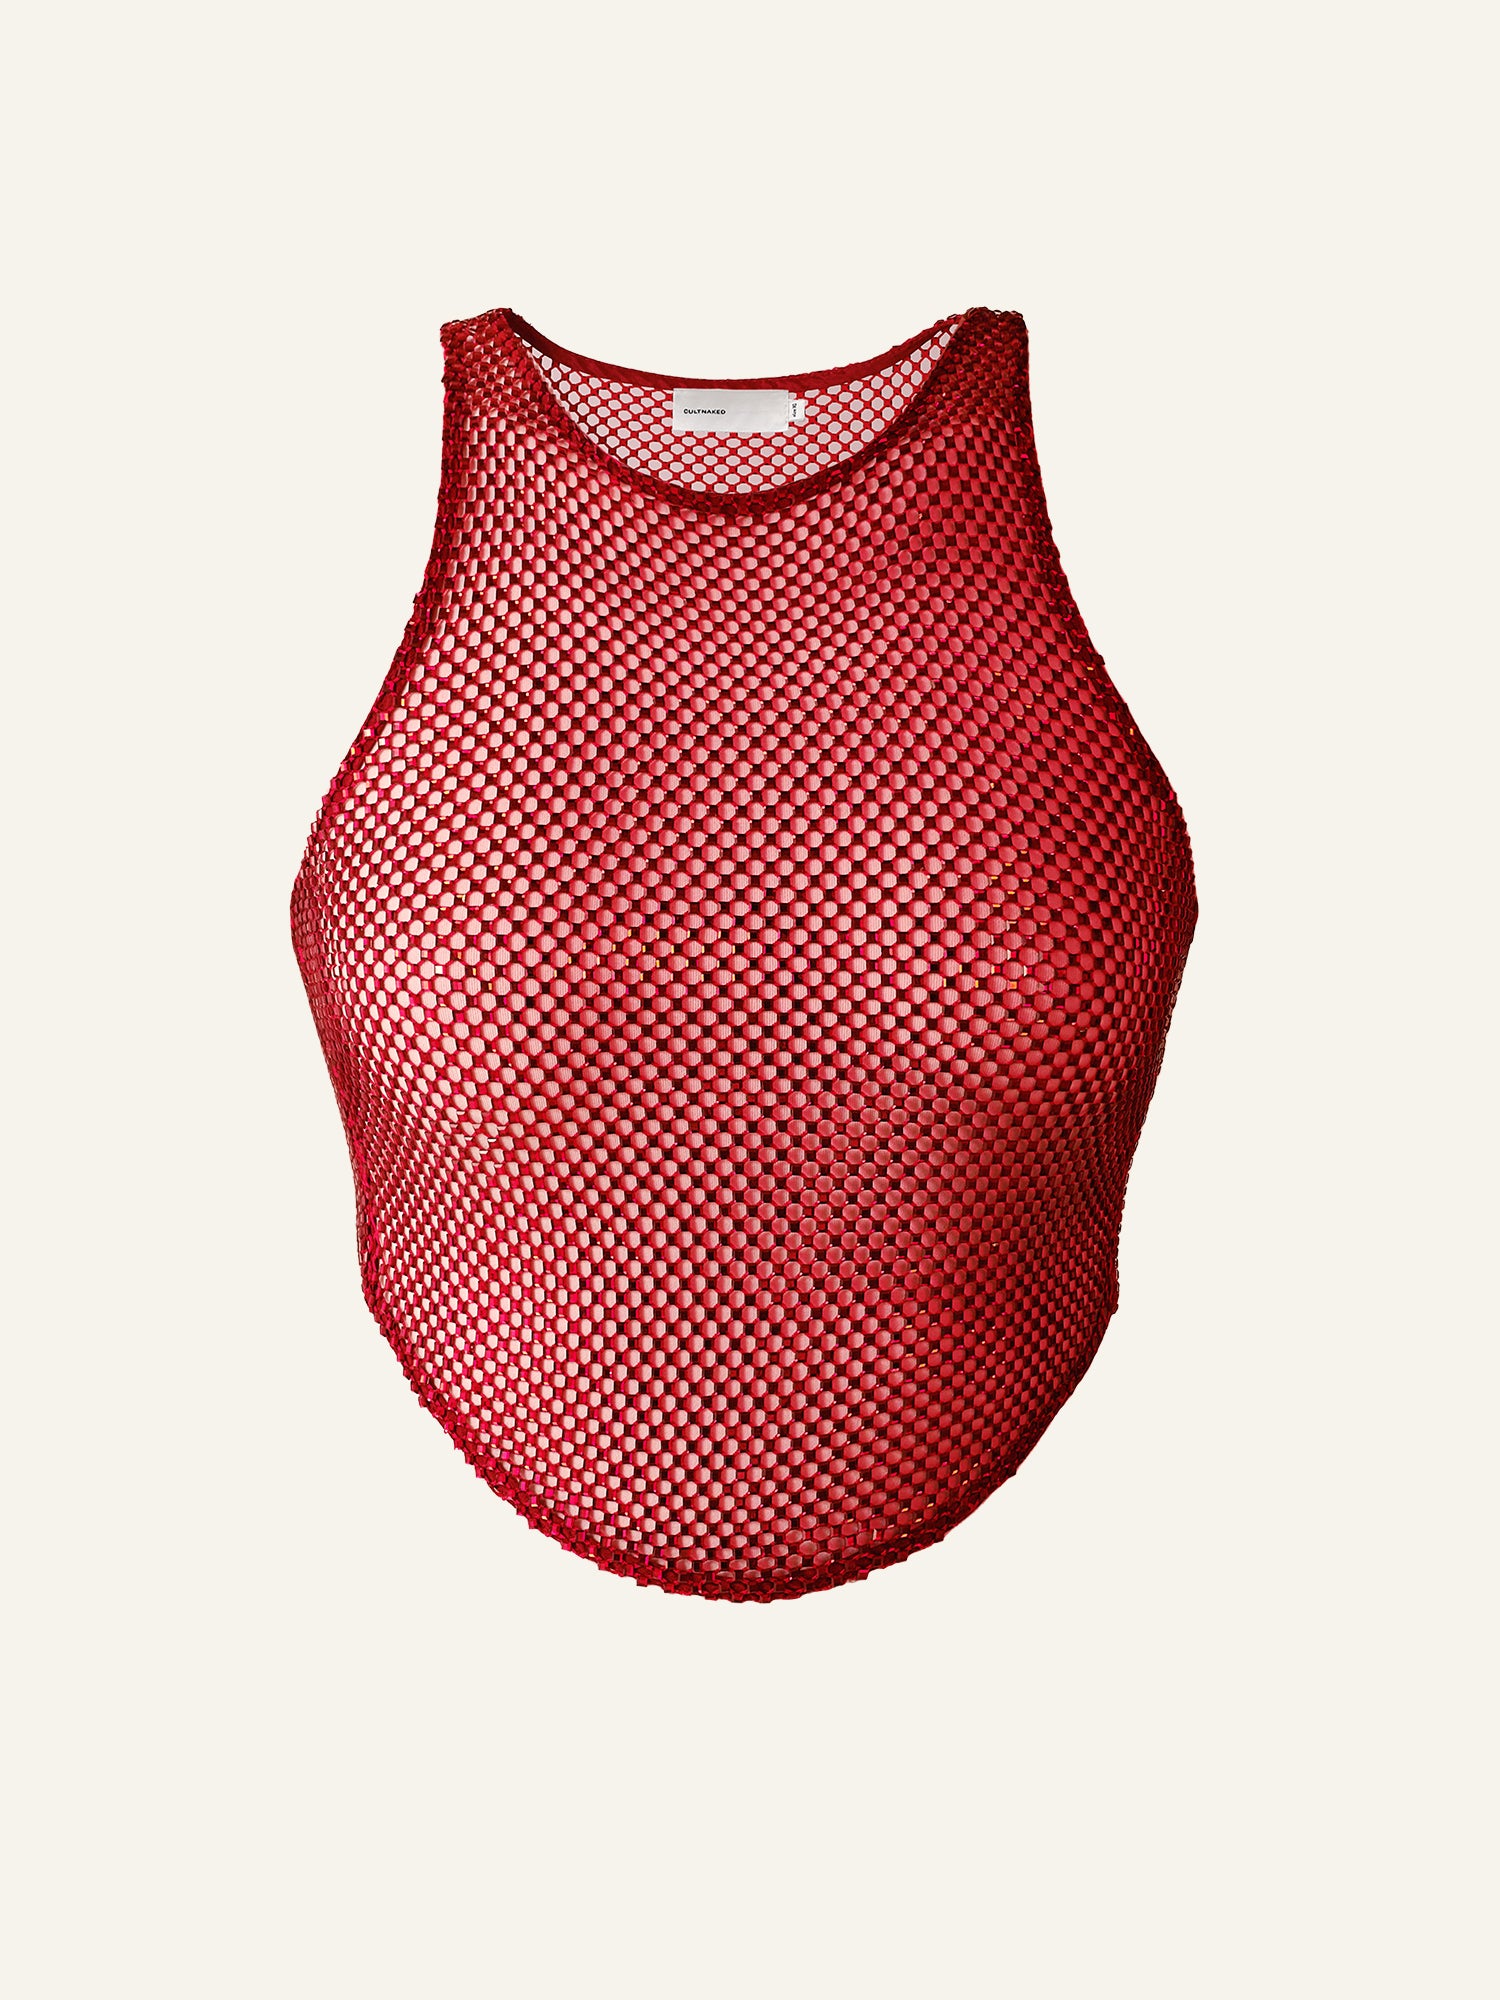 Product photo of a red asymmetric hem net crop top decorated with rhinestones